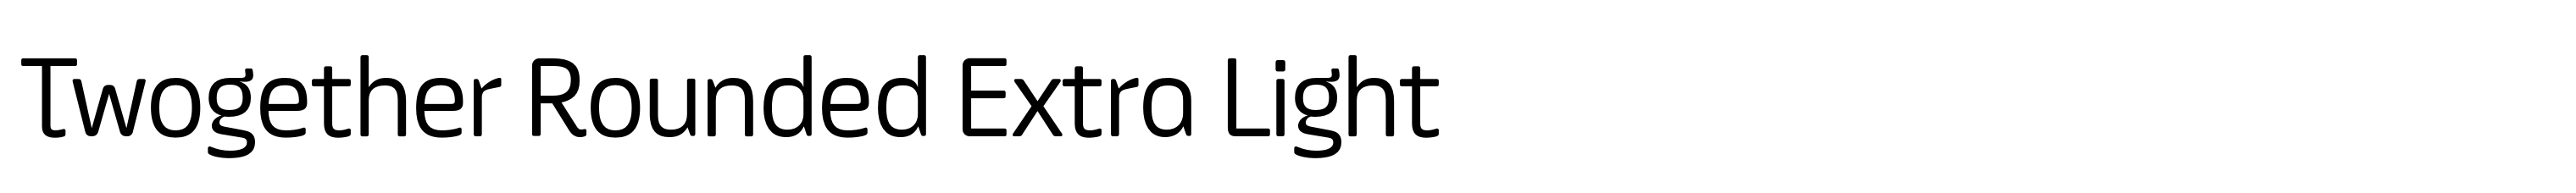 Twogether Rounded Extra Light